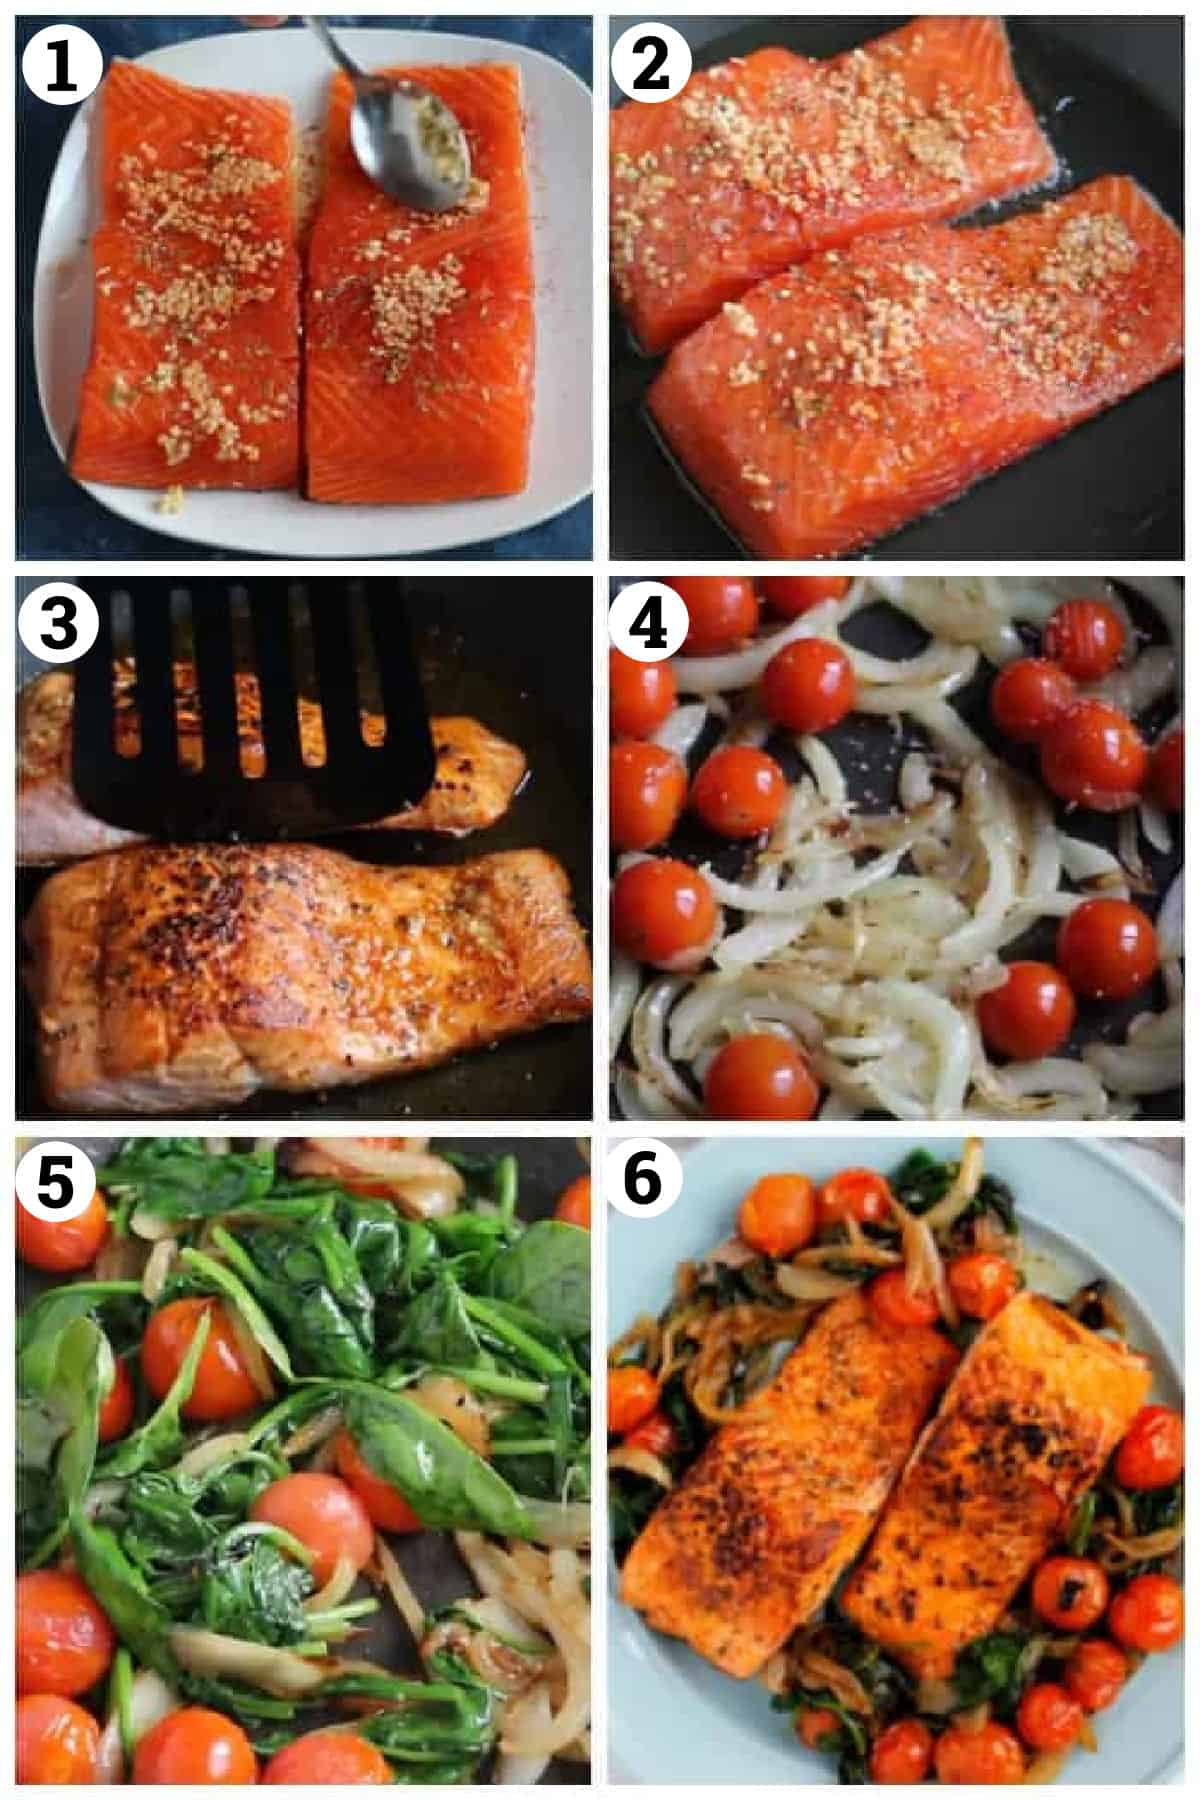 Step by step photos to make pan seared salmon. Brush the fillets with some olive oil and season with spices and garlic. Sear the salmon for 4 minutes in each side until opaque and cooked through. As a side dish, saute onions, tomatoes and spinach to serve with salmon. 